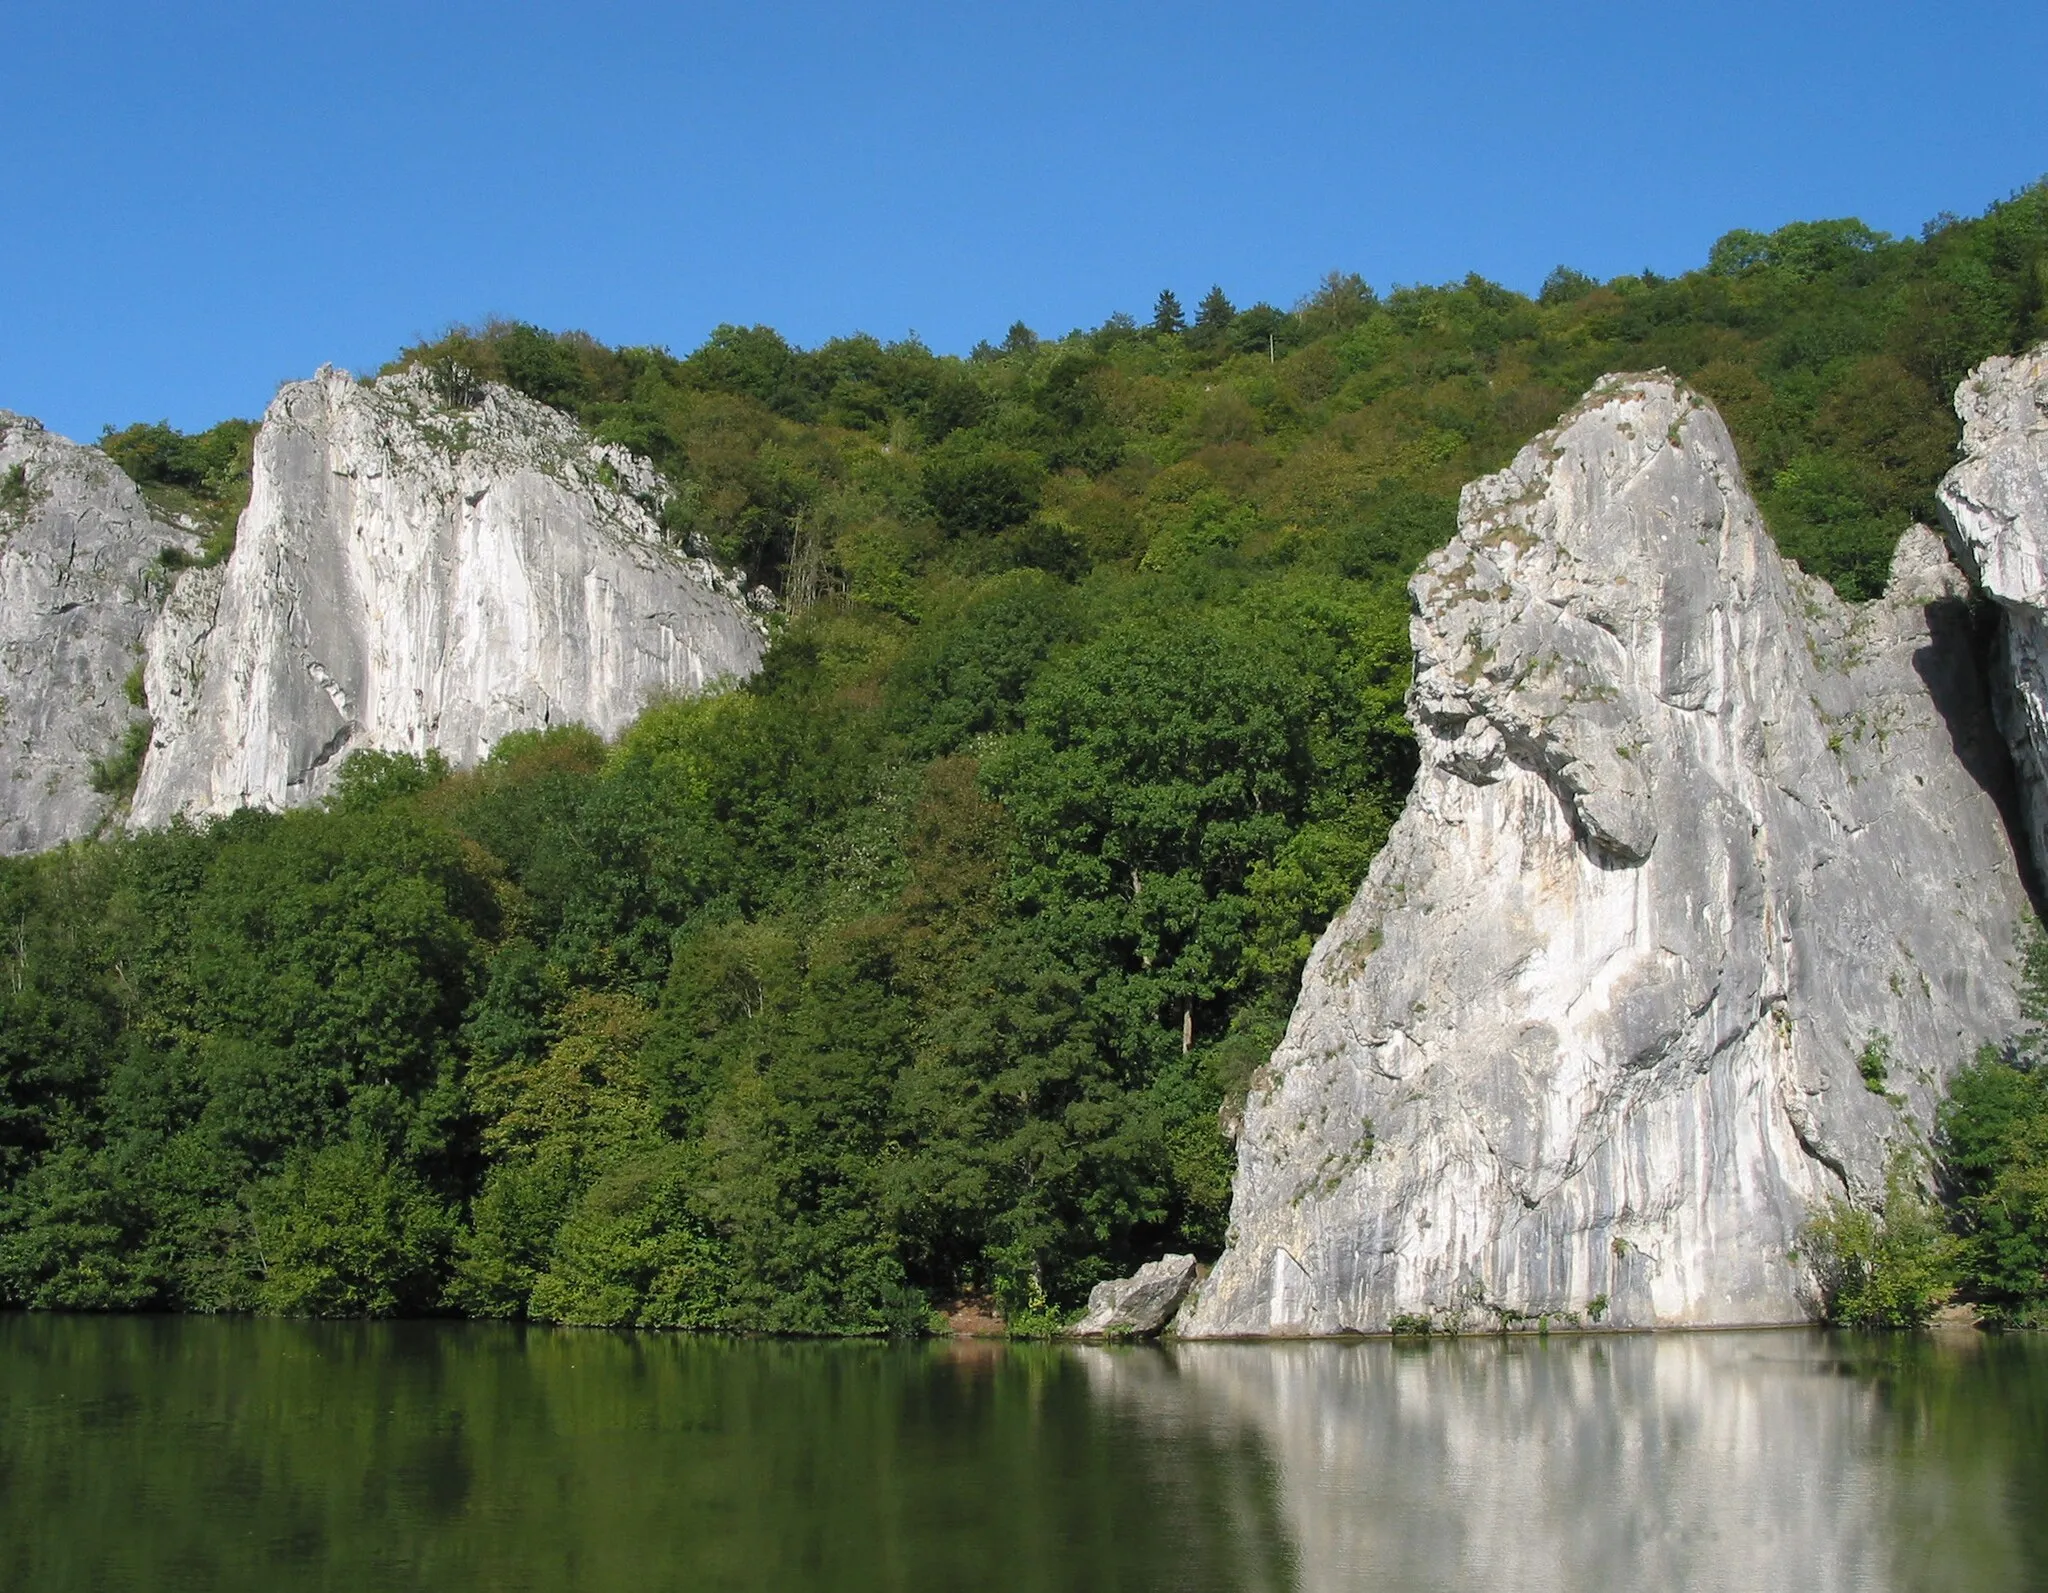 Photo showing: The Freÿr Rocks and the Meuse river between Waulsort and Anseremme (Belgium).